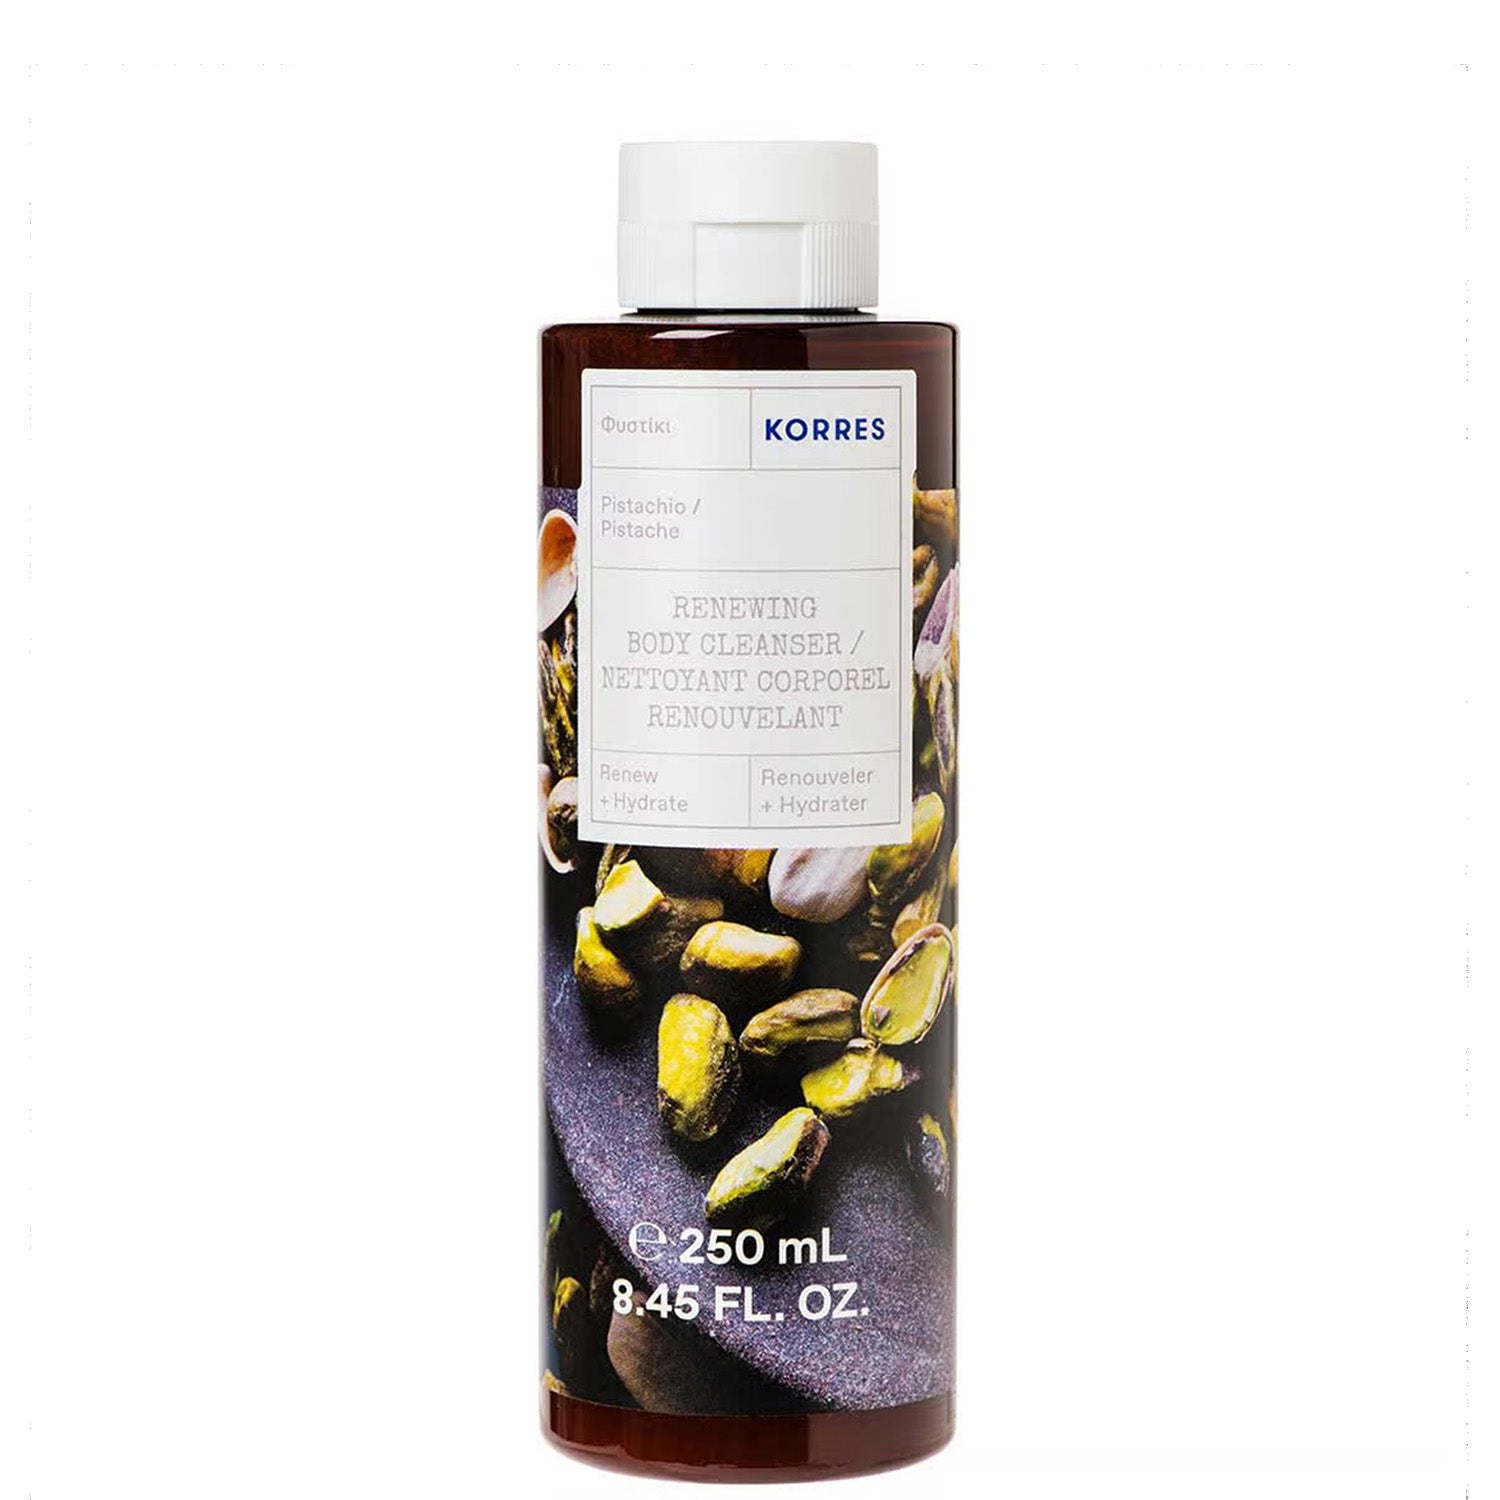 Korres Pistachio Renewing Body Cleanser s formulated with aloe extract, wheat proteins, and Althea extract.